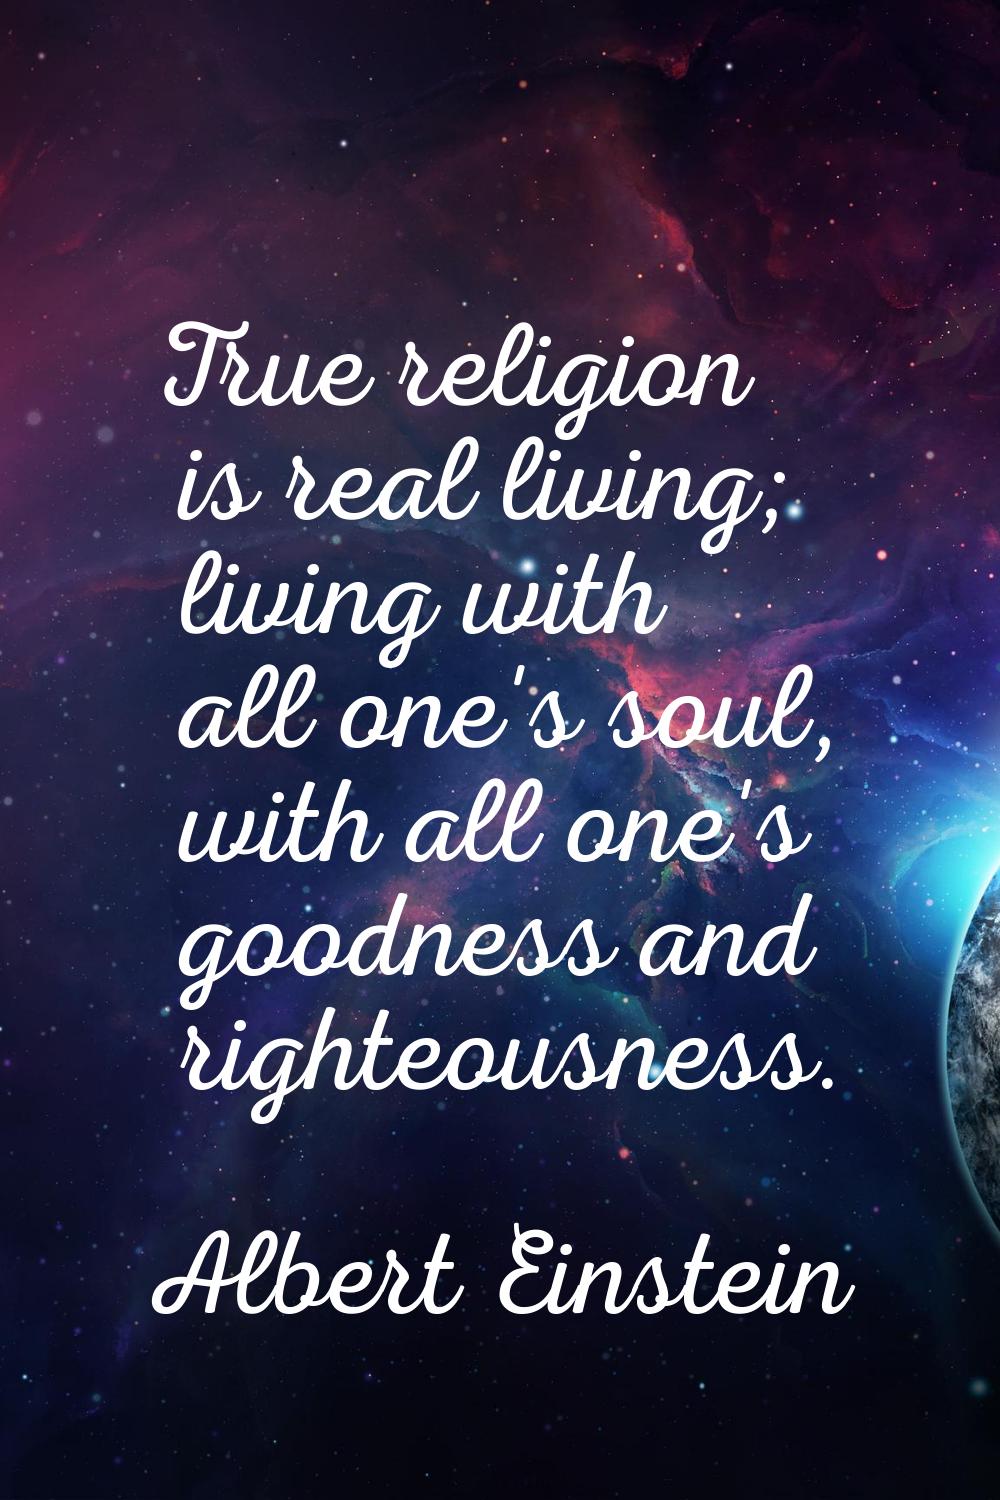 True religion is real living; living with all one's soul, with all one's goodness and righteousness